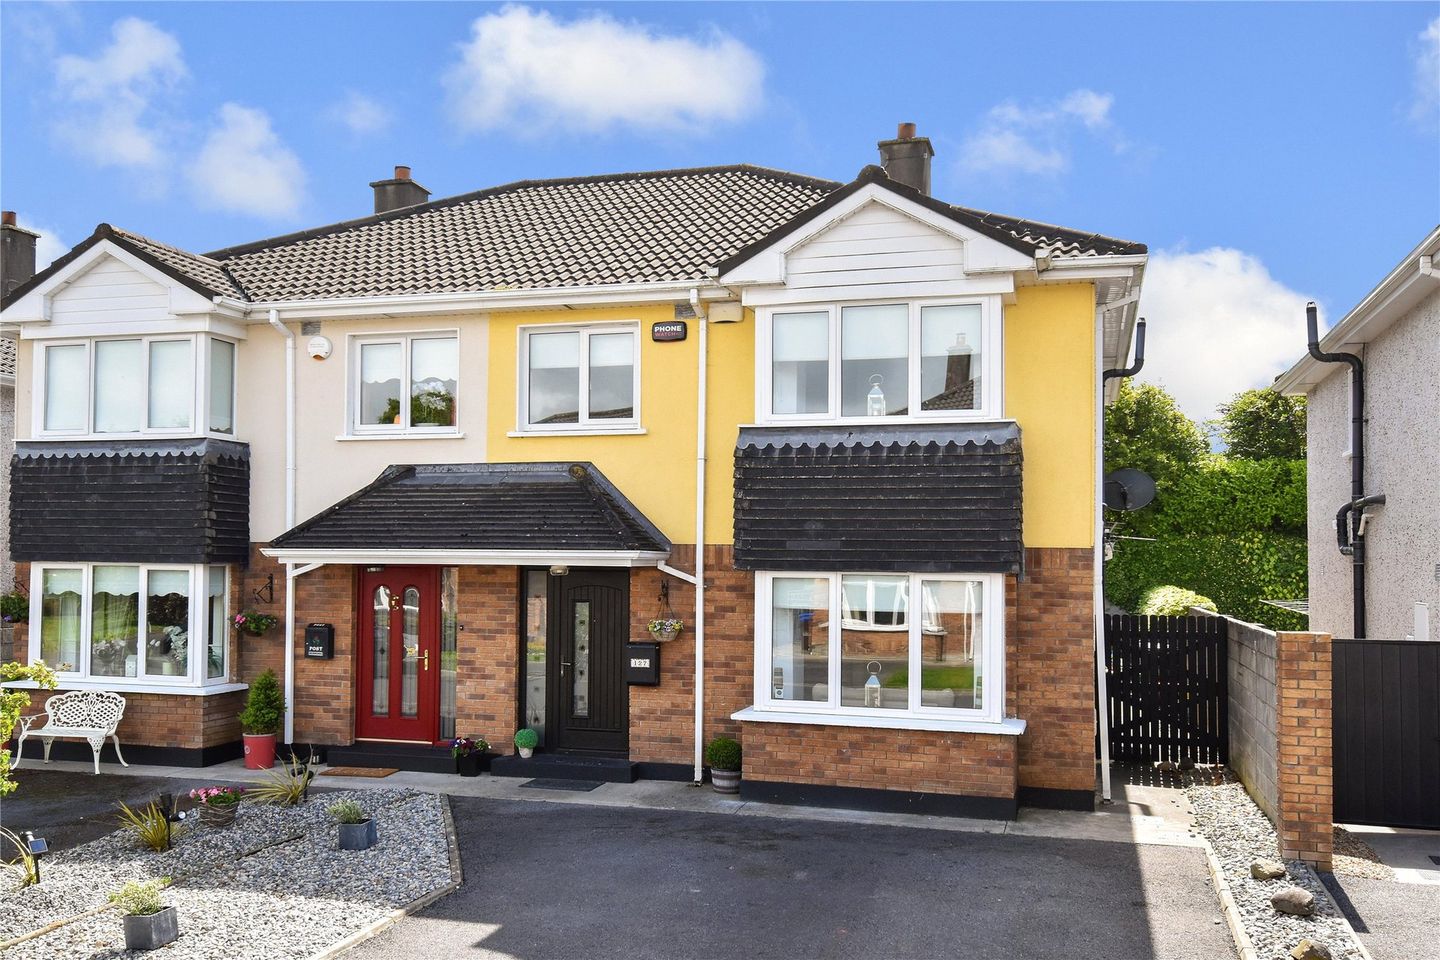 127 River Oaks, Claregalway, Co. Galway